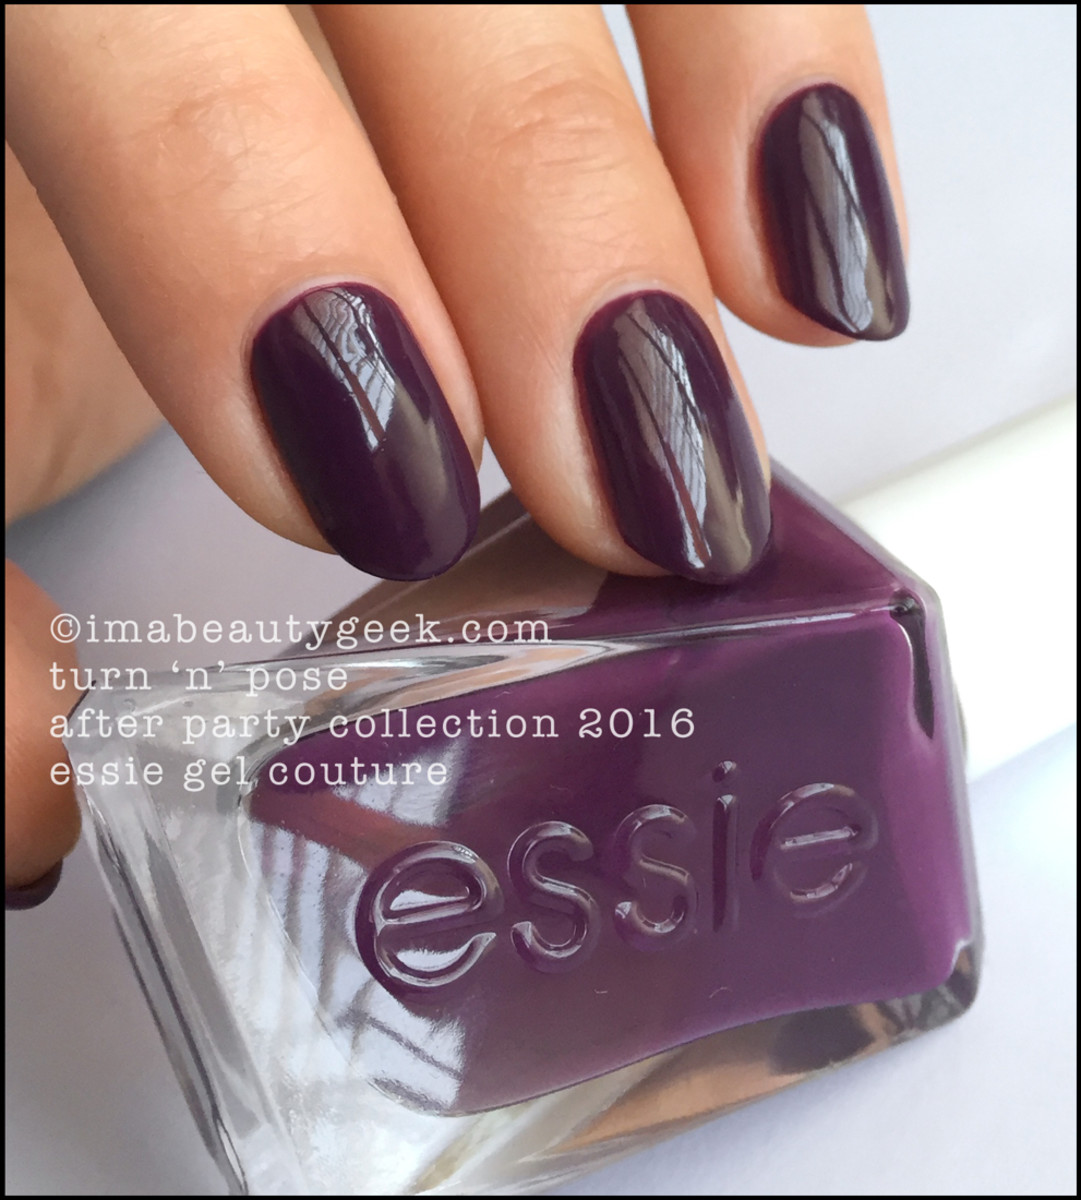 Essie Turn n Pose_Essie Gel Couture Swatches Review 2016